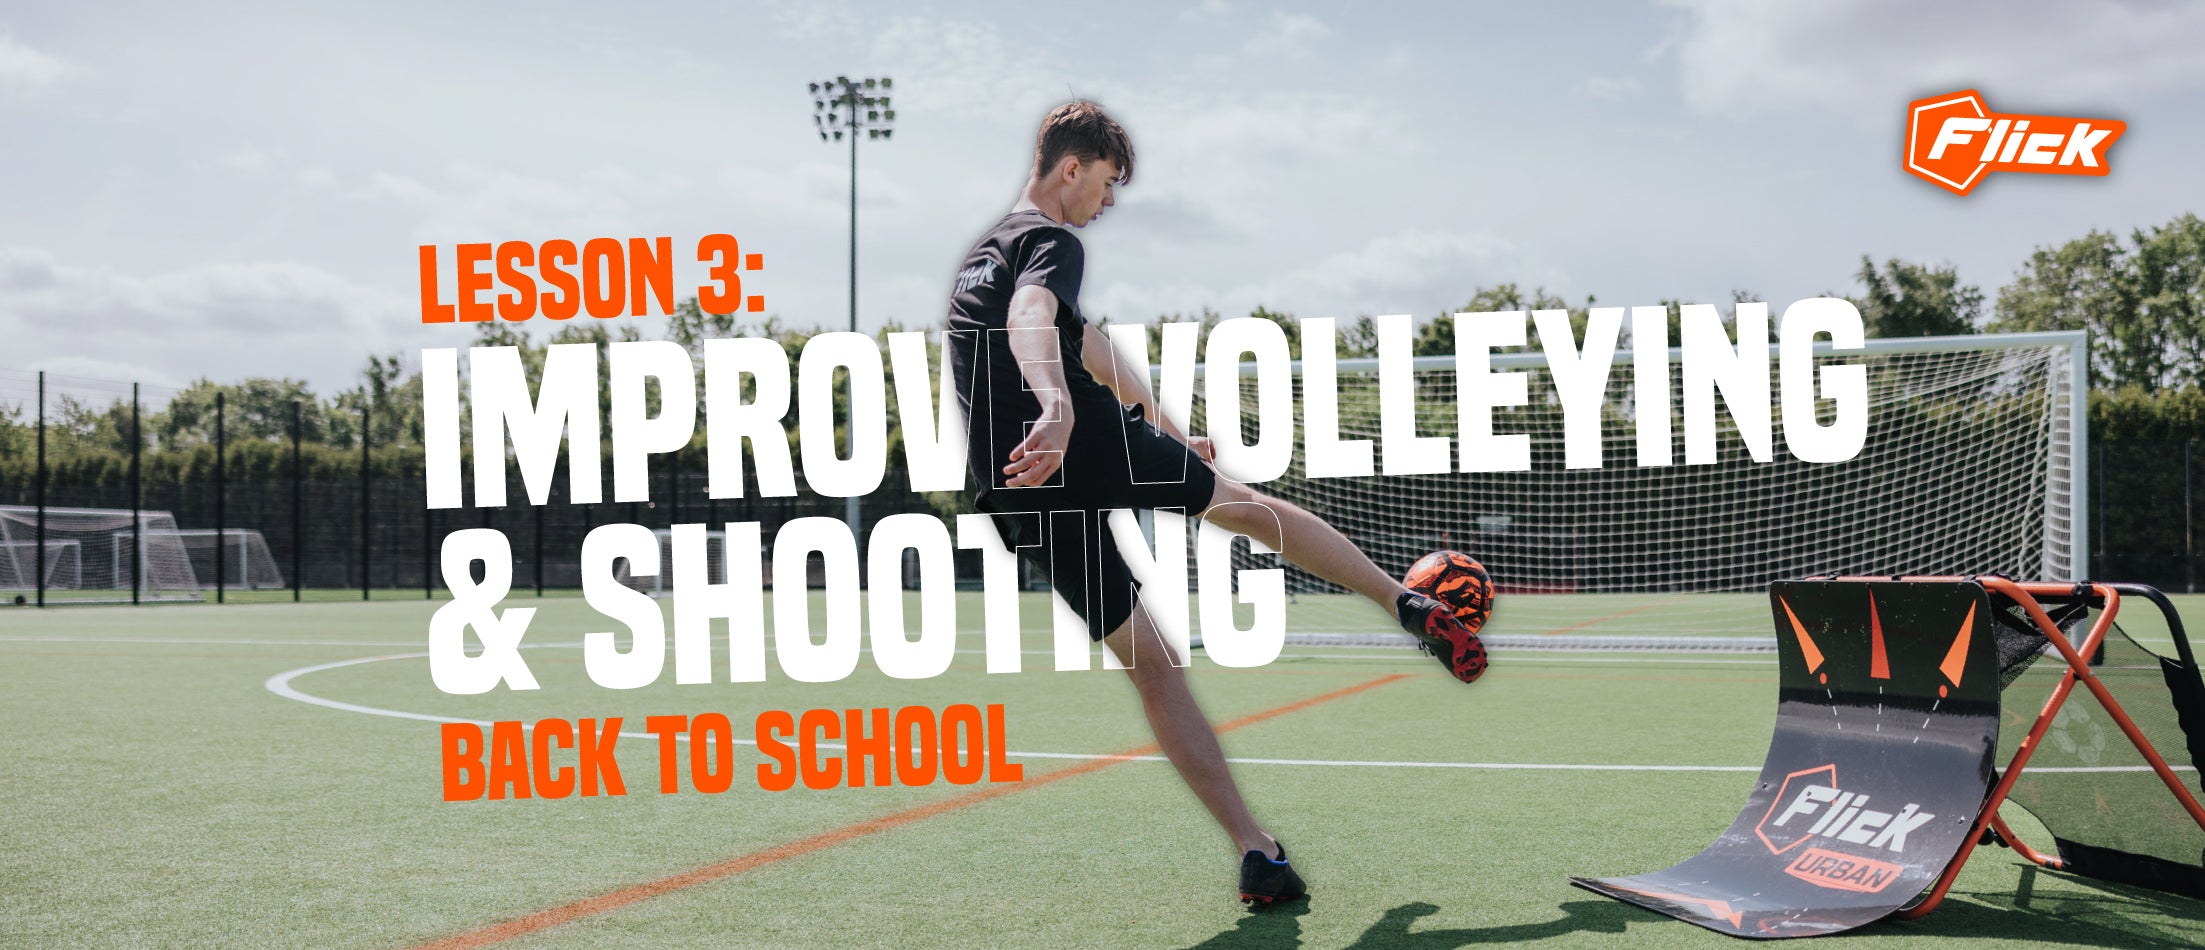 How to Improve Volleying and Shooting - Lesson 3 - Back to School